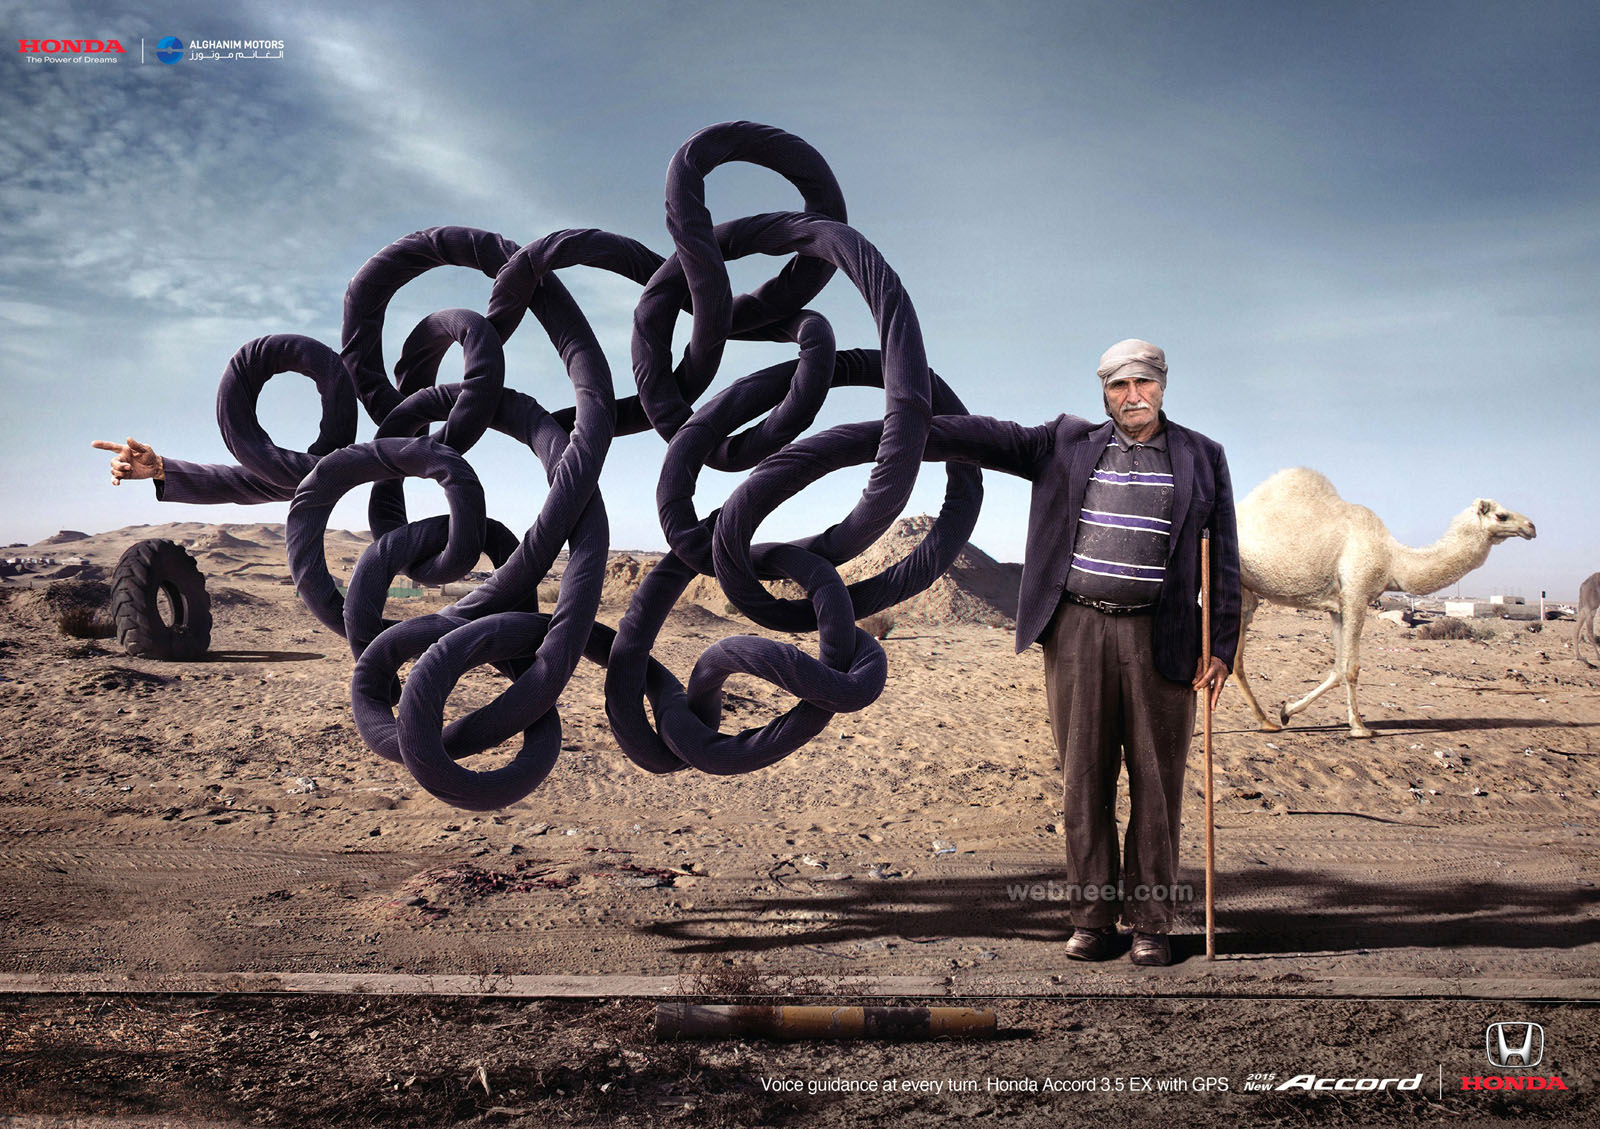 80 Creative Print Advertisements and print ads for your inspiration